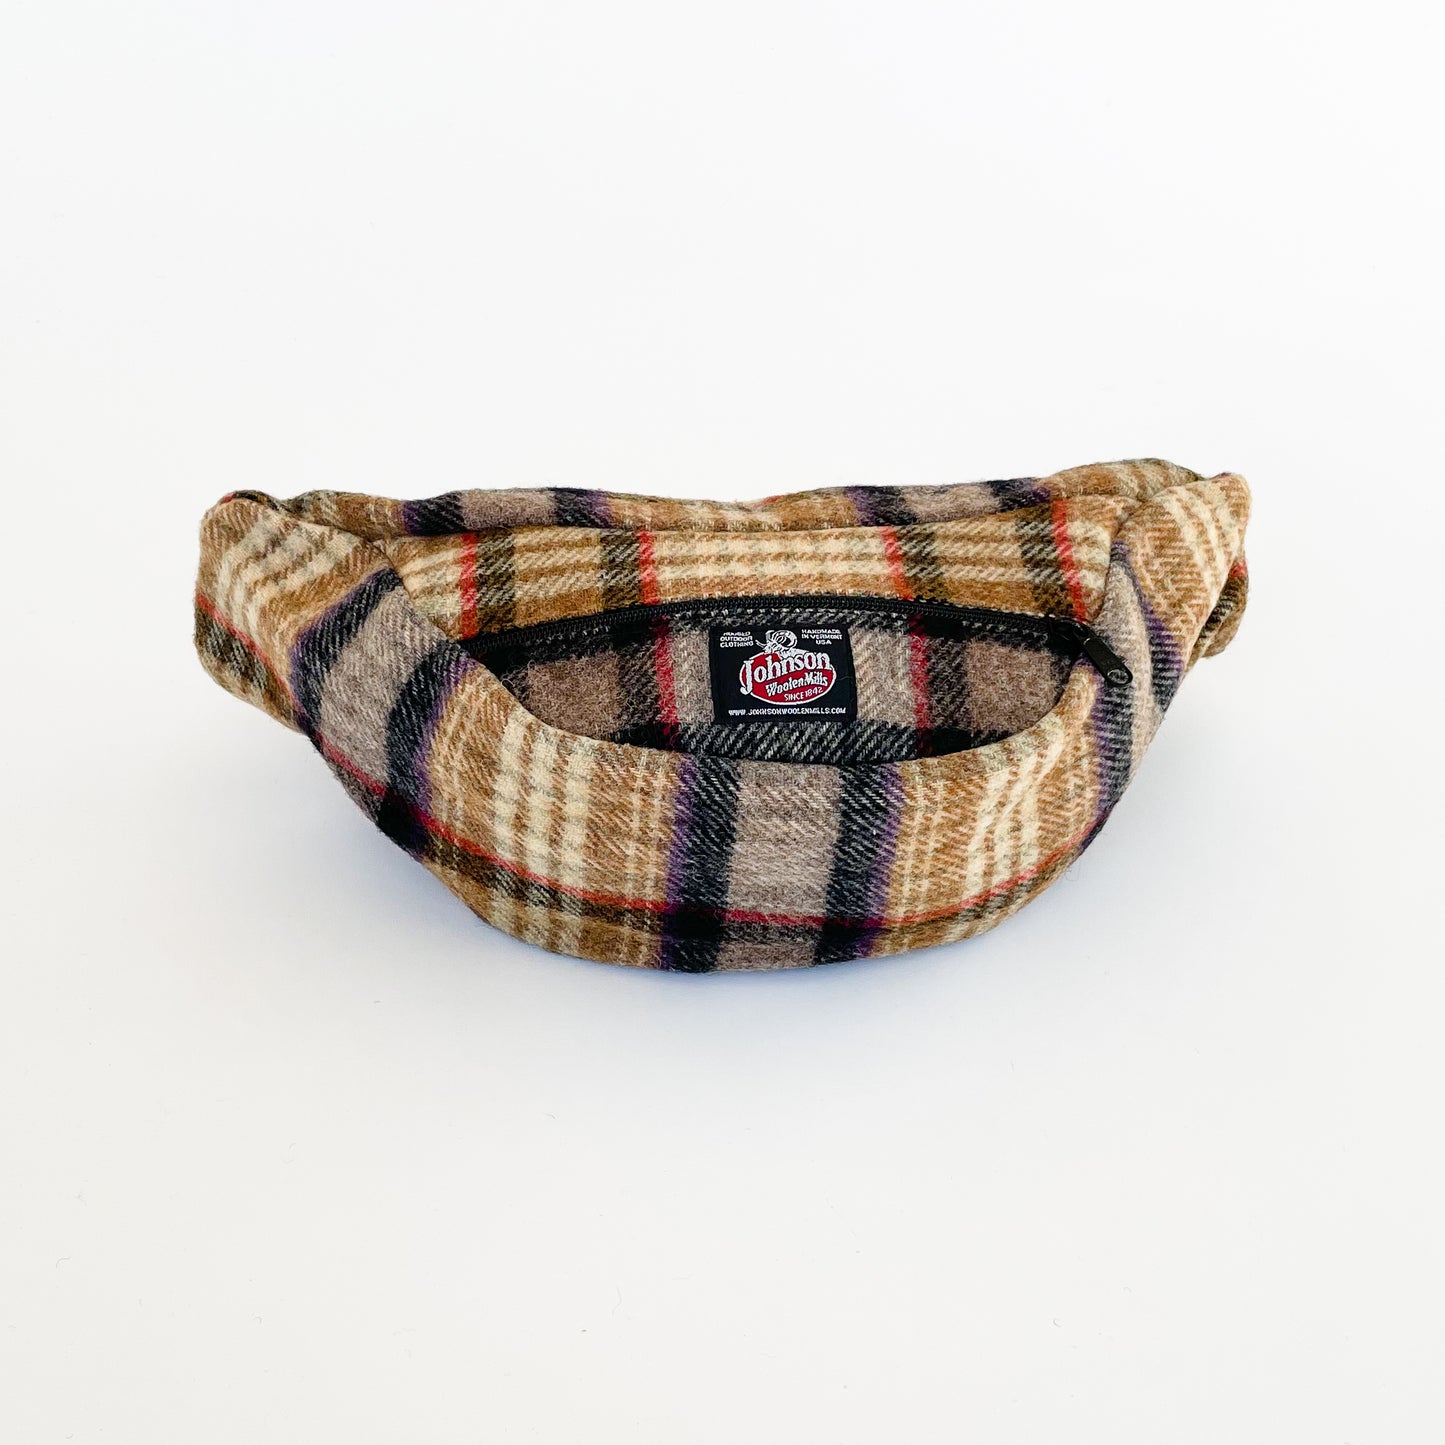 Johnson Woolen Mills Oversized Fanny Pack Gold/Black/Red Plaid bottom and front view